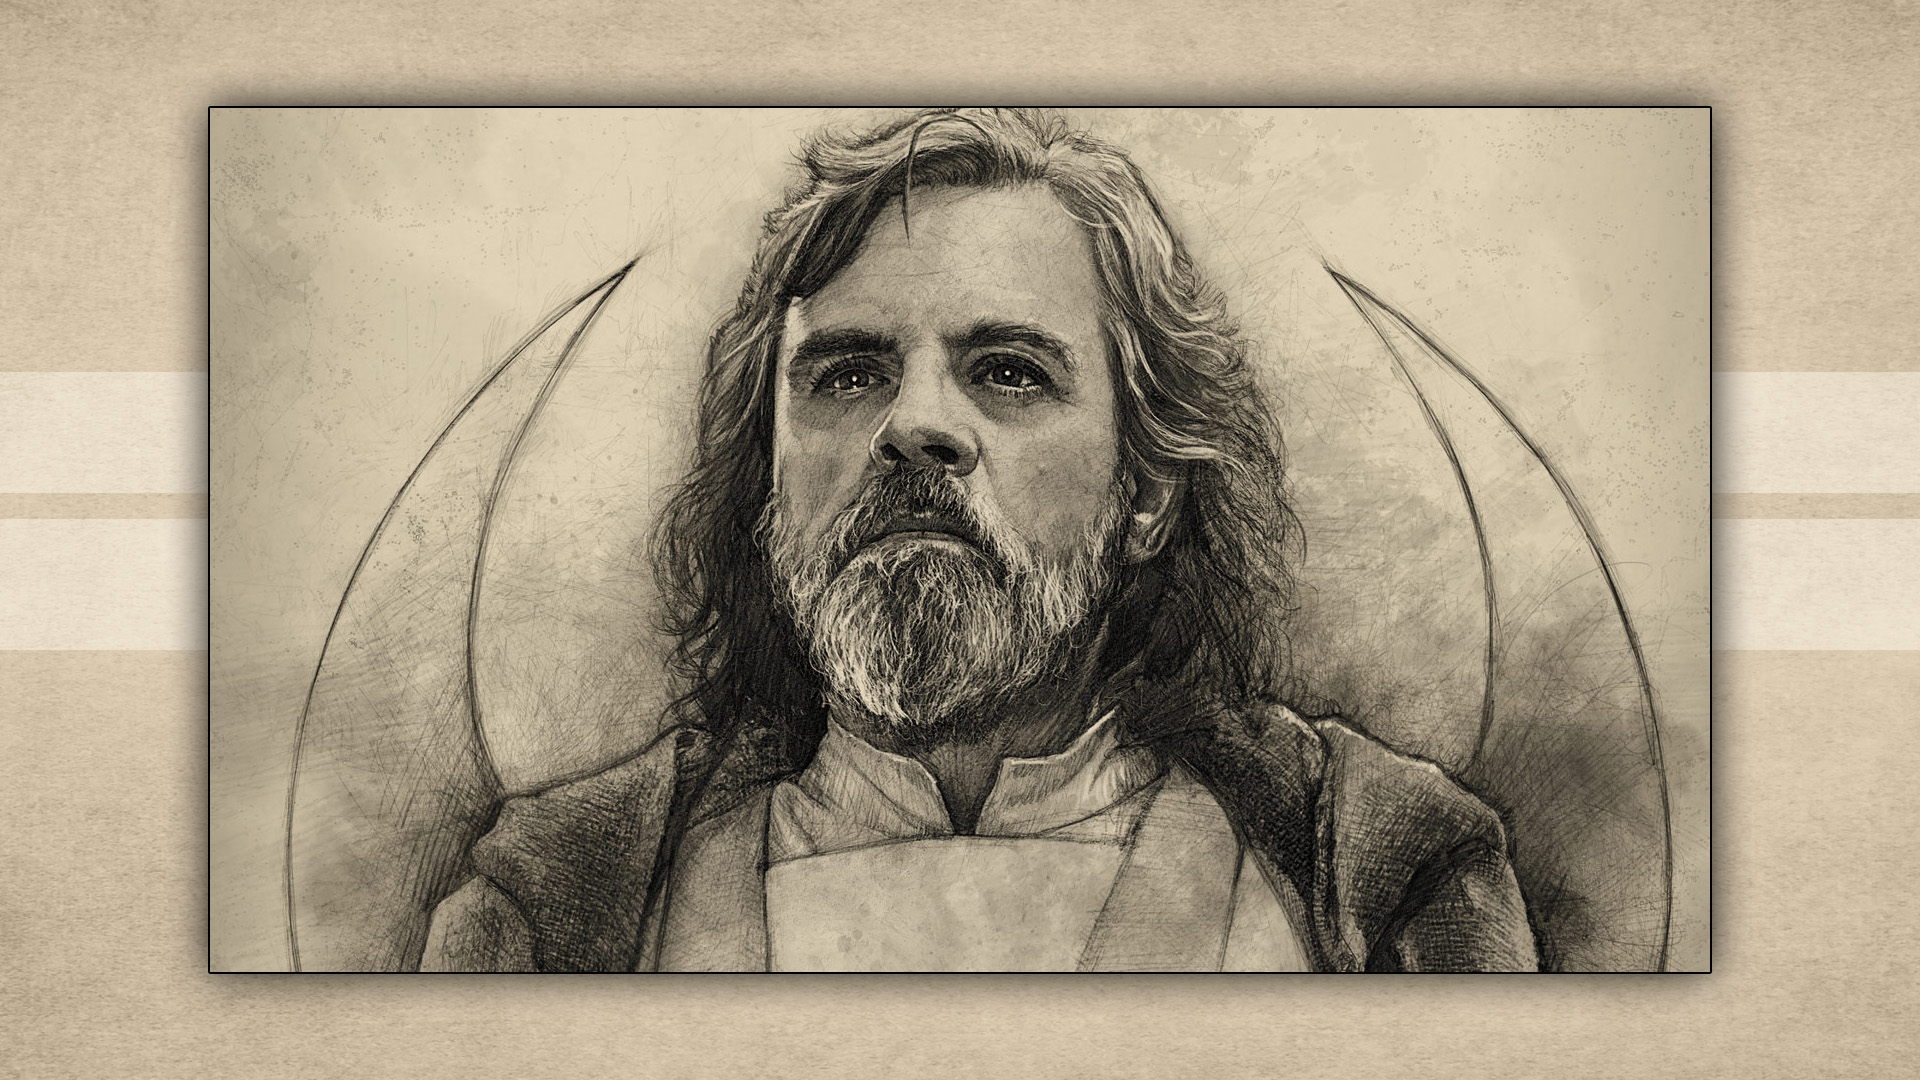 Jedi Master VIP badge by Paul Shipper (edited by Michael White)